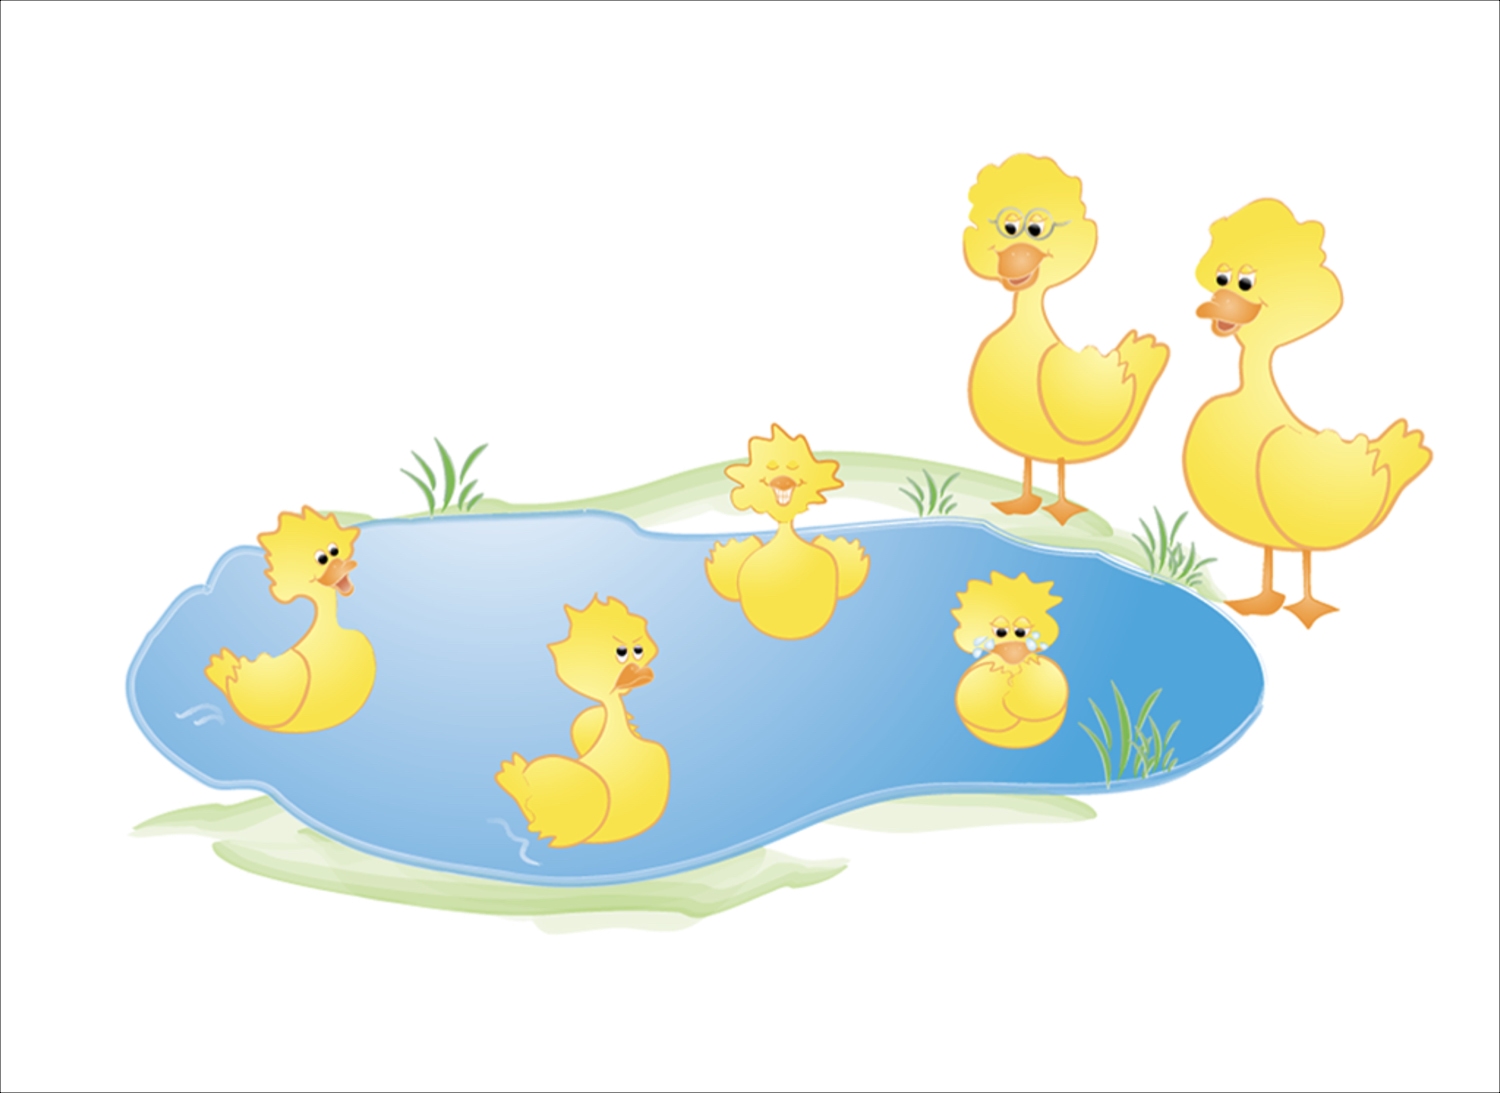 IntroDUCKtion Pond iPad - Apps for child emotion